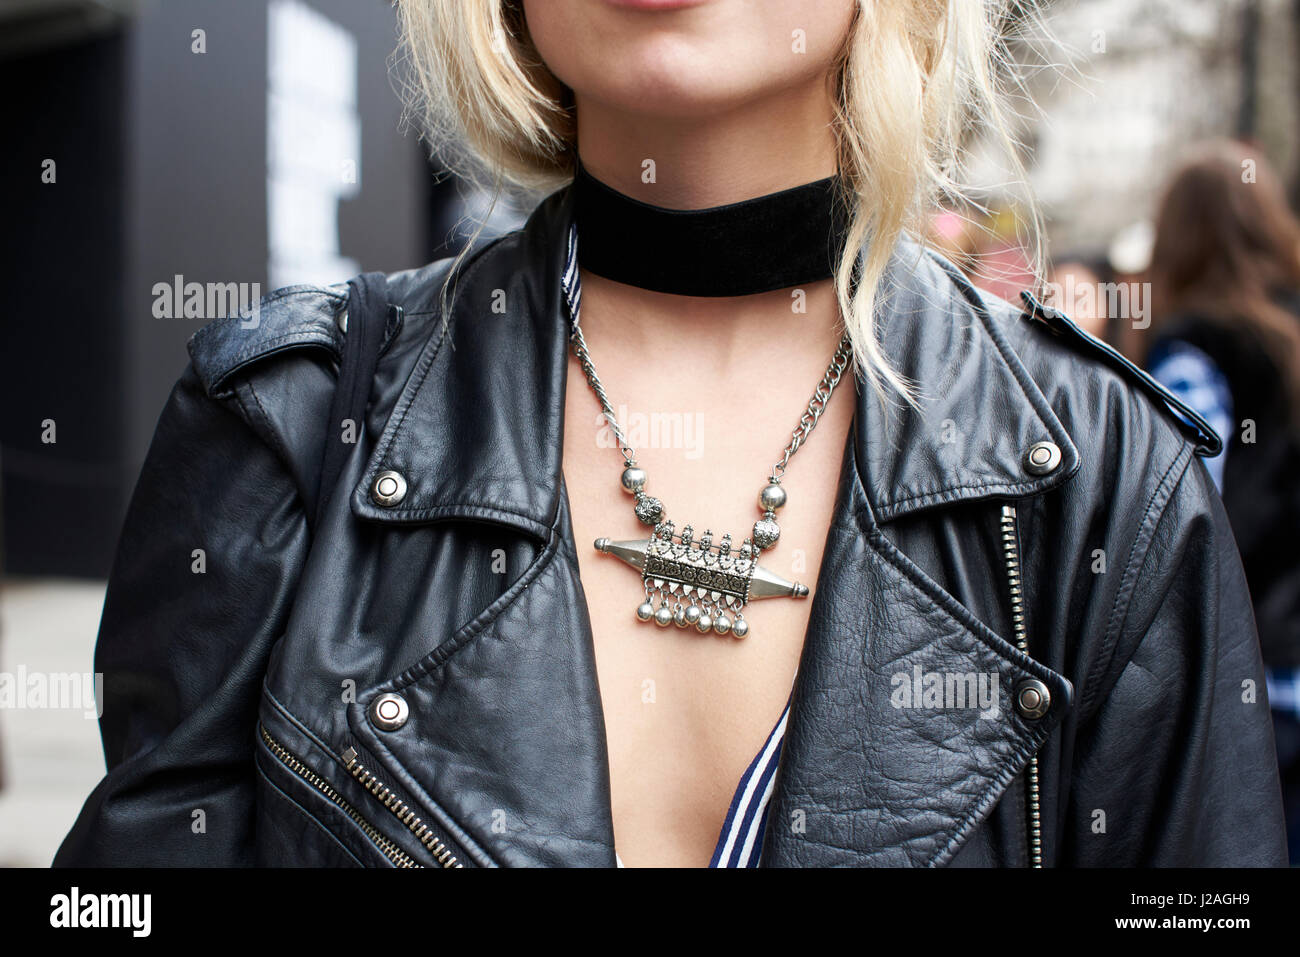 LONDON - FEBRUARY, 2017: Close up crop of  woman wearing a black leather jacket, black choker and a silver tribal necklace in the street during London Fashion Week, horizontal, front view Stock Photo